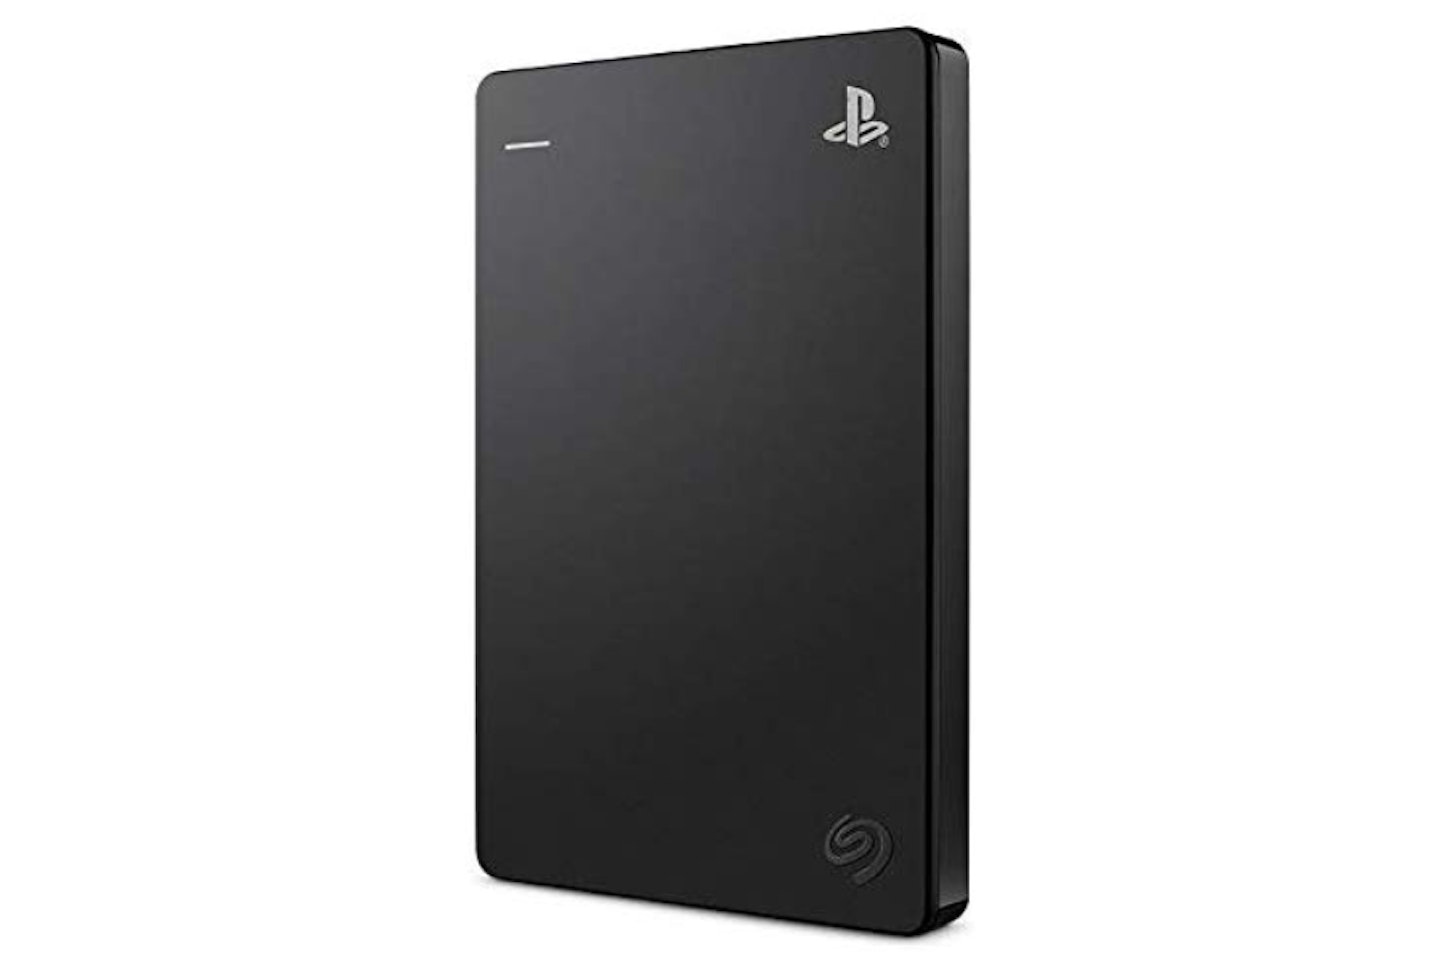 Seagate 2 TB Game Drive External Hard Drive for PS4, £79.98